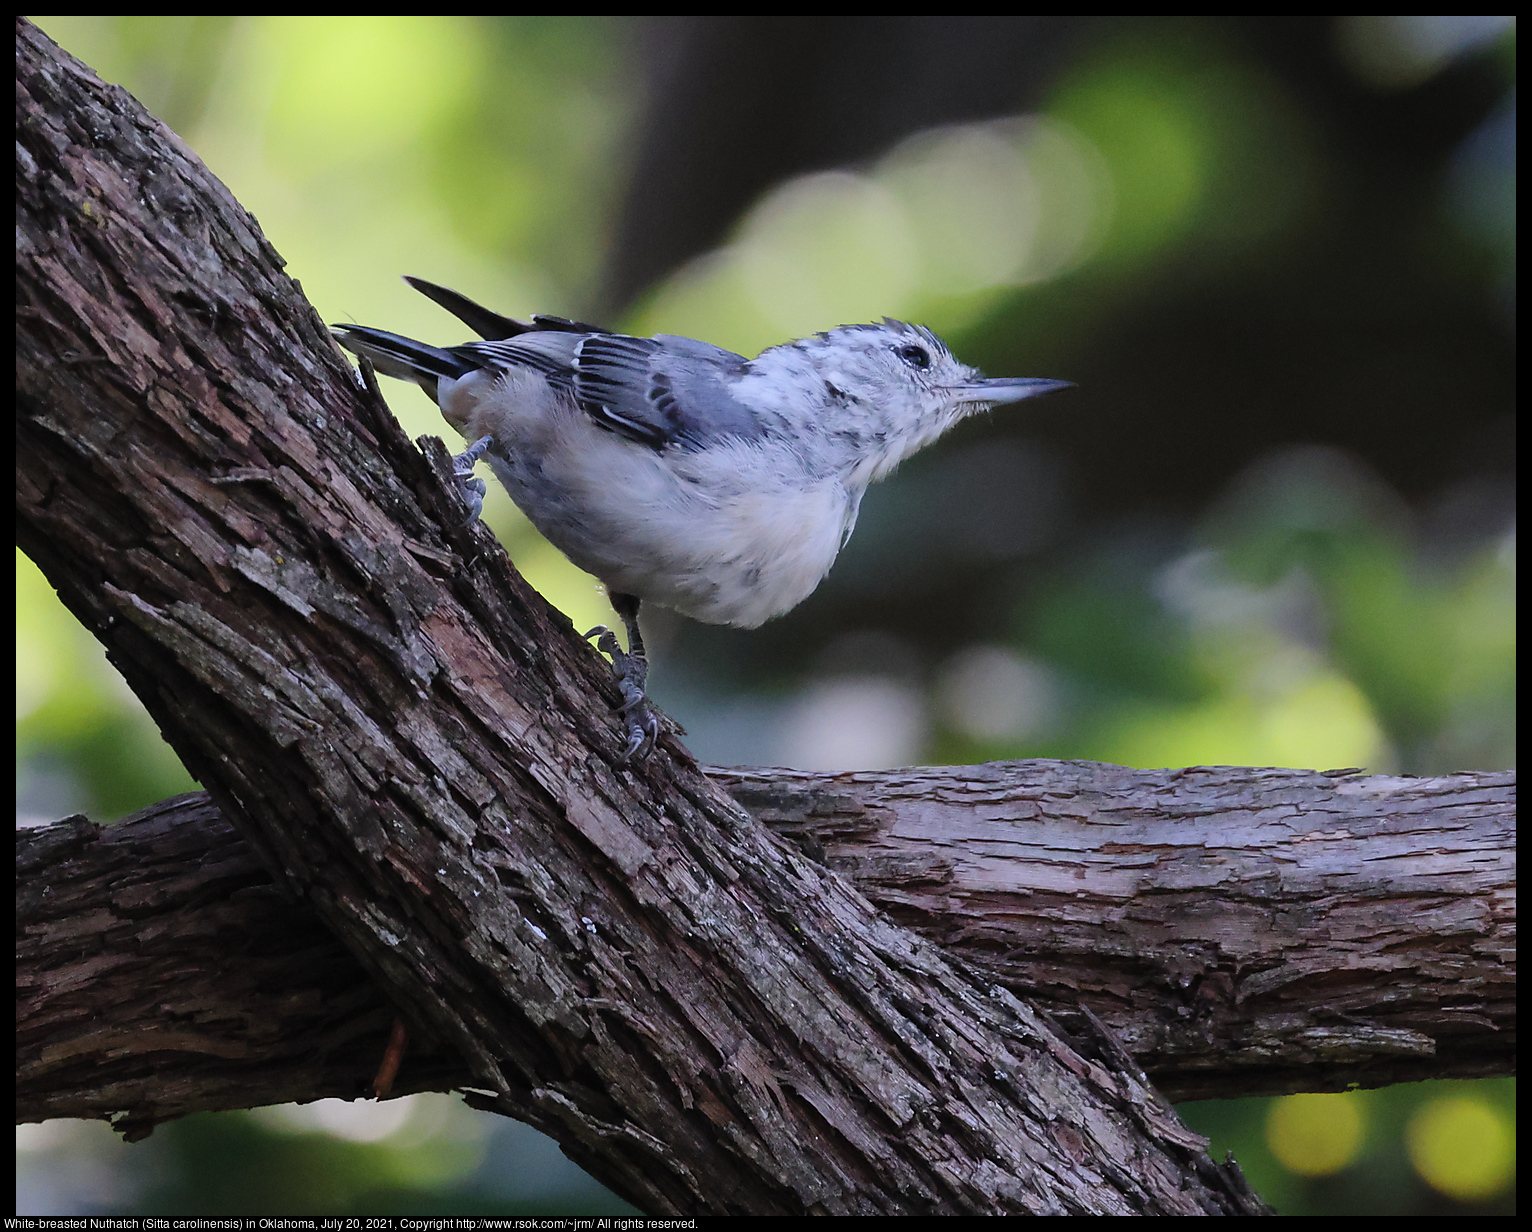 White-breasted Nuthatch (Sitta carolinensis) in Oklahoma, July 20, 2021